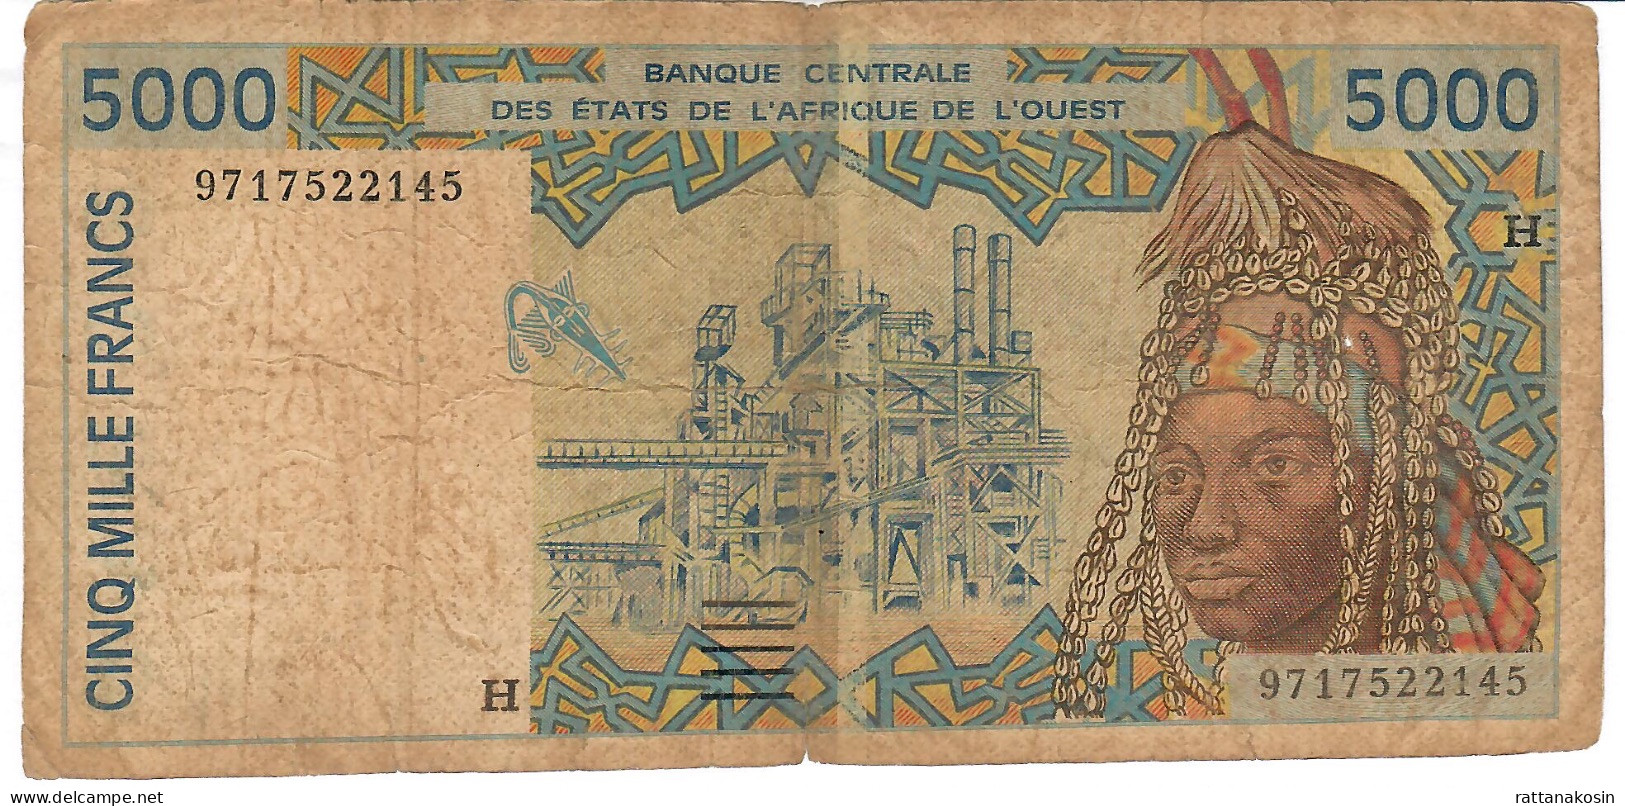 W.A.S. NIGER    P613He 5000 FRANCS (19)97 1997  Signature 28  FINE - West African States